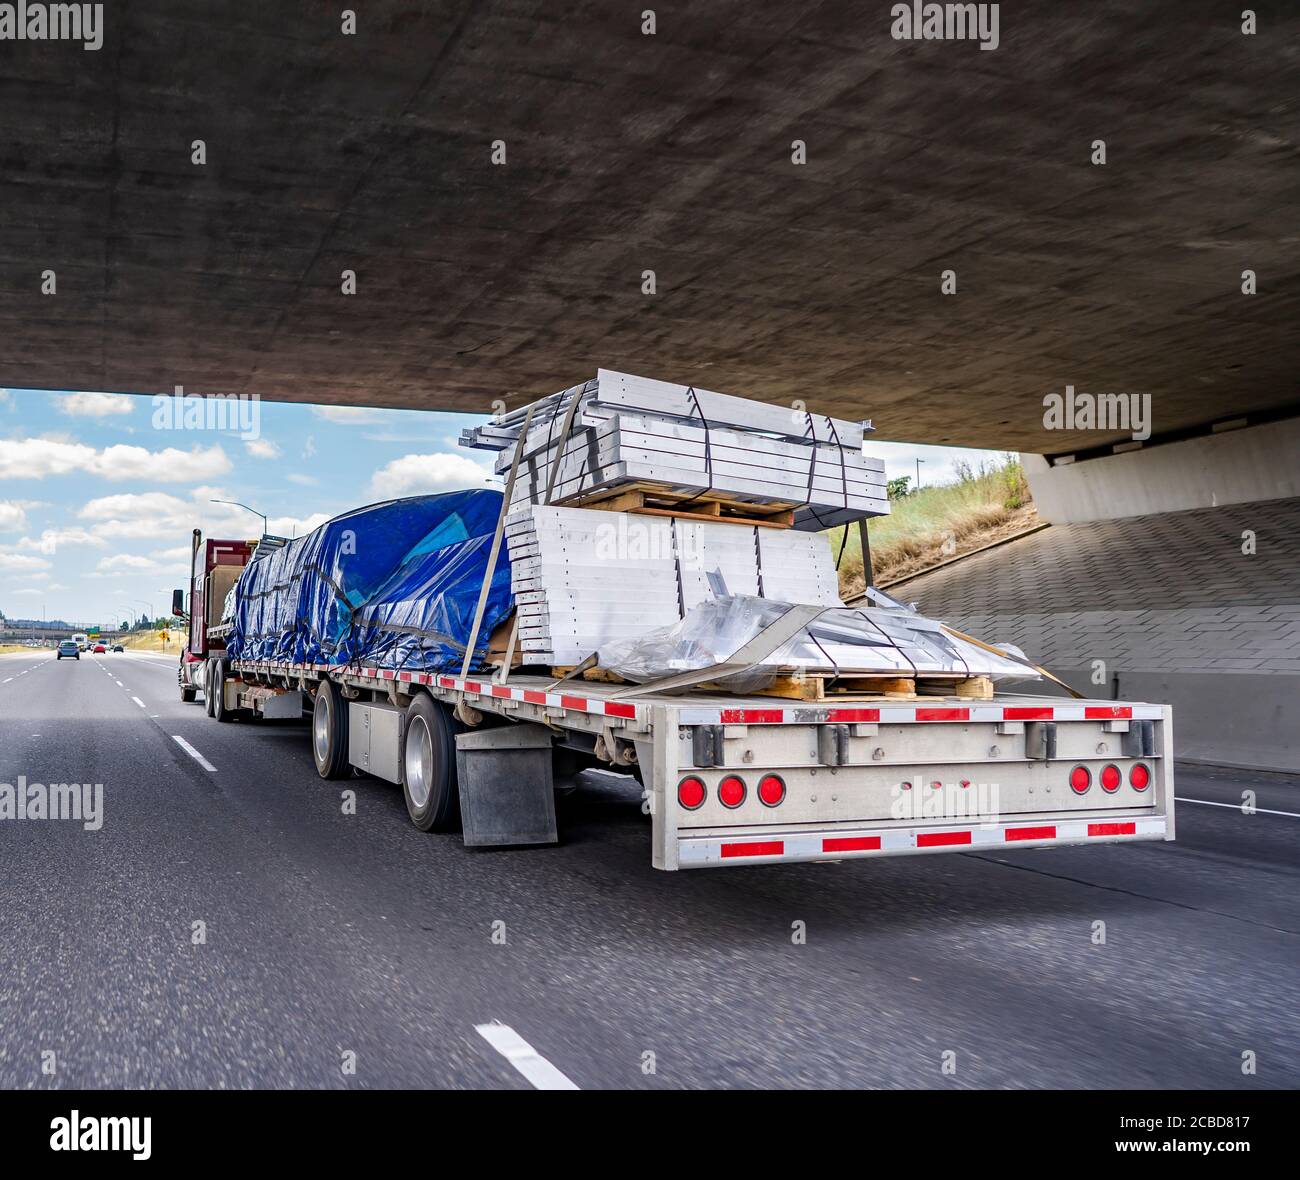 Hard loaded classic red big rig semi truck transporting covered and tightened commercial cargo on flat bed semi trailer running under the bridge acros Stock Photo